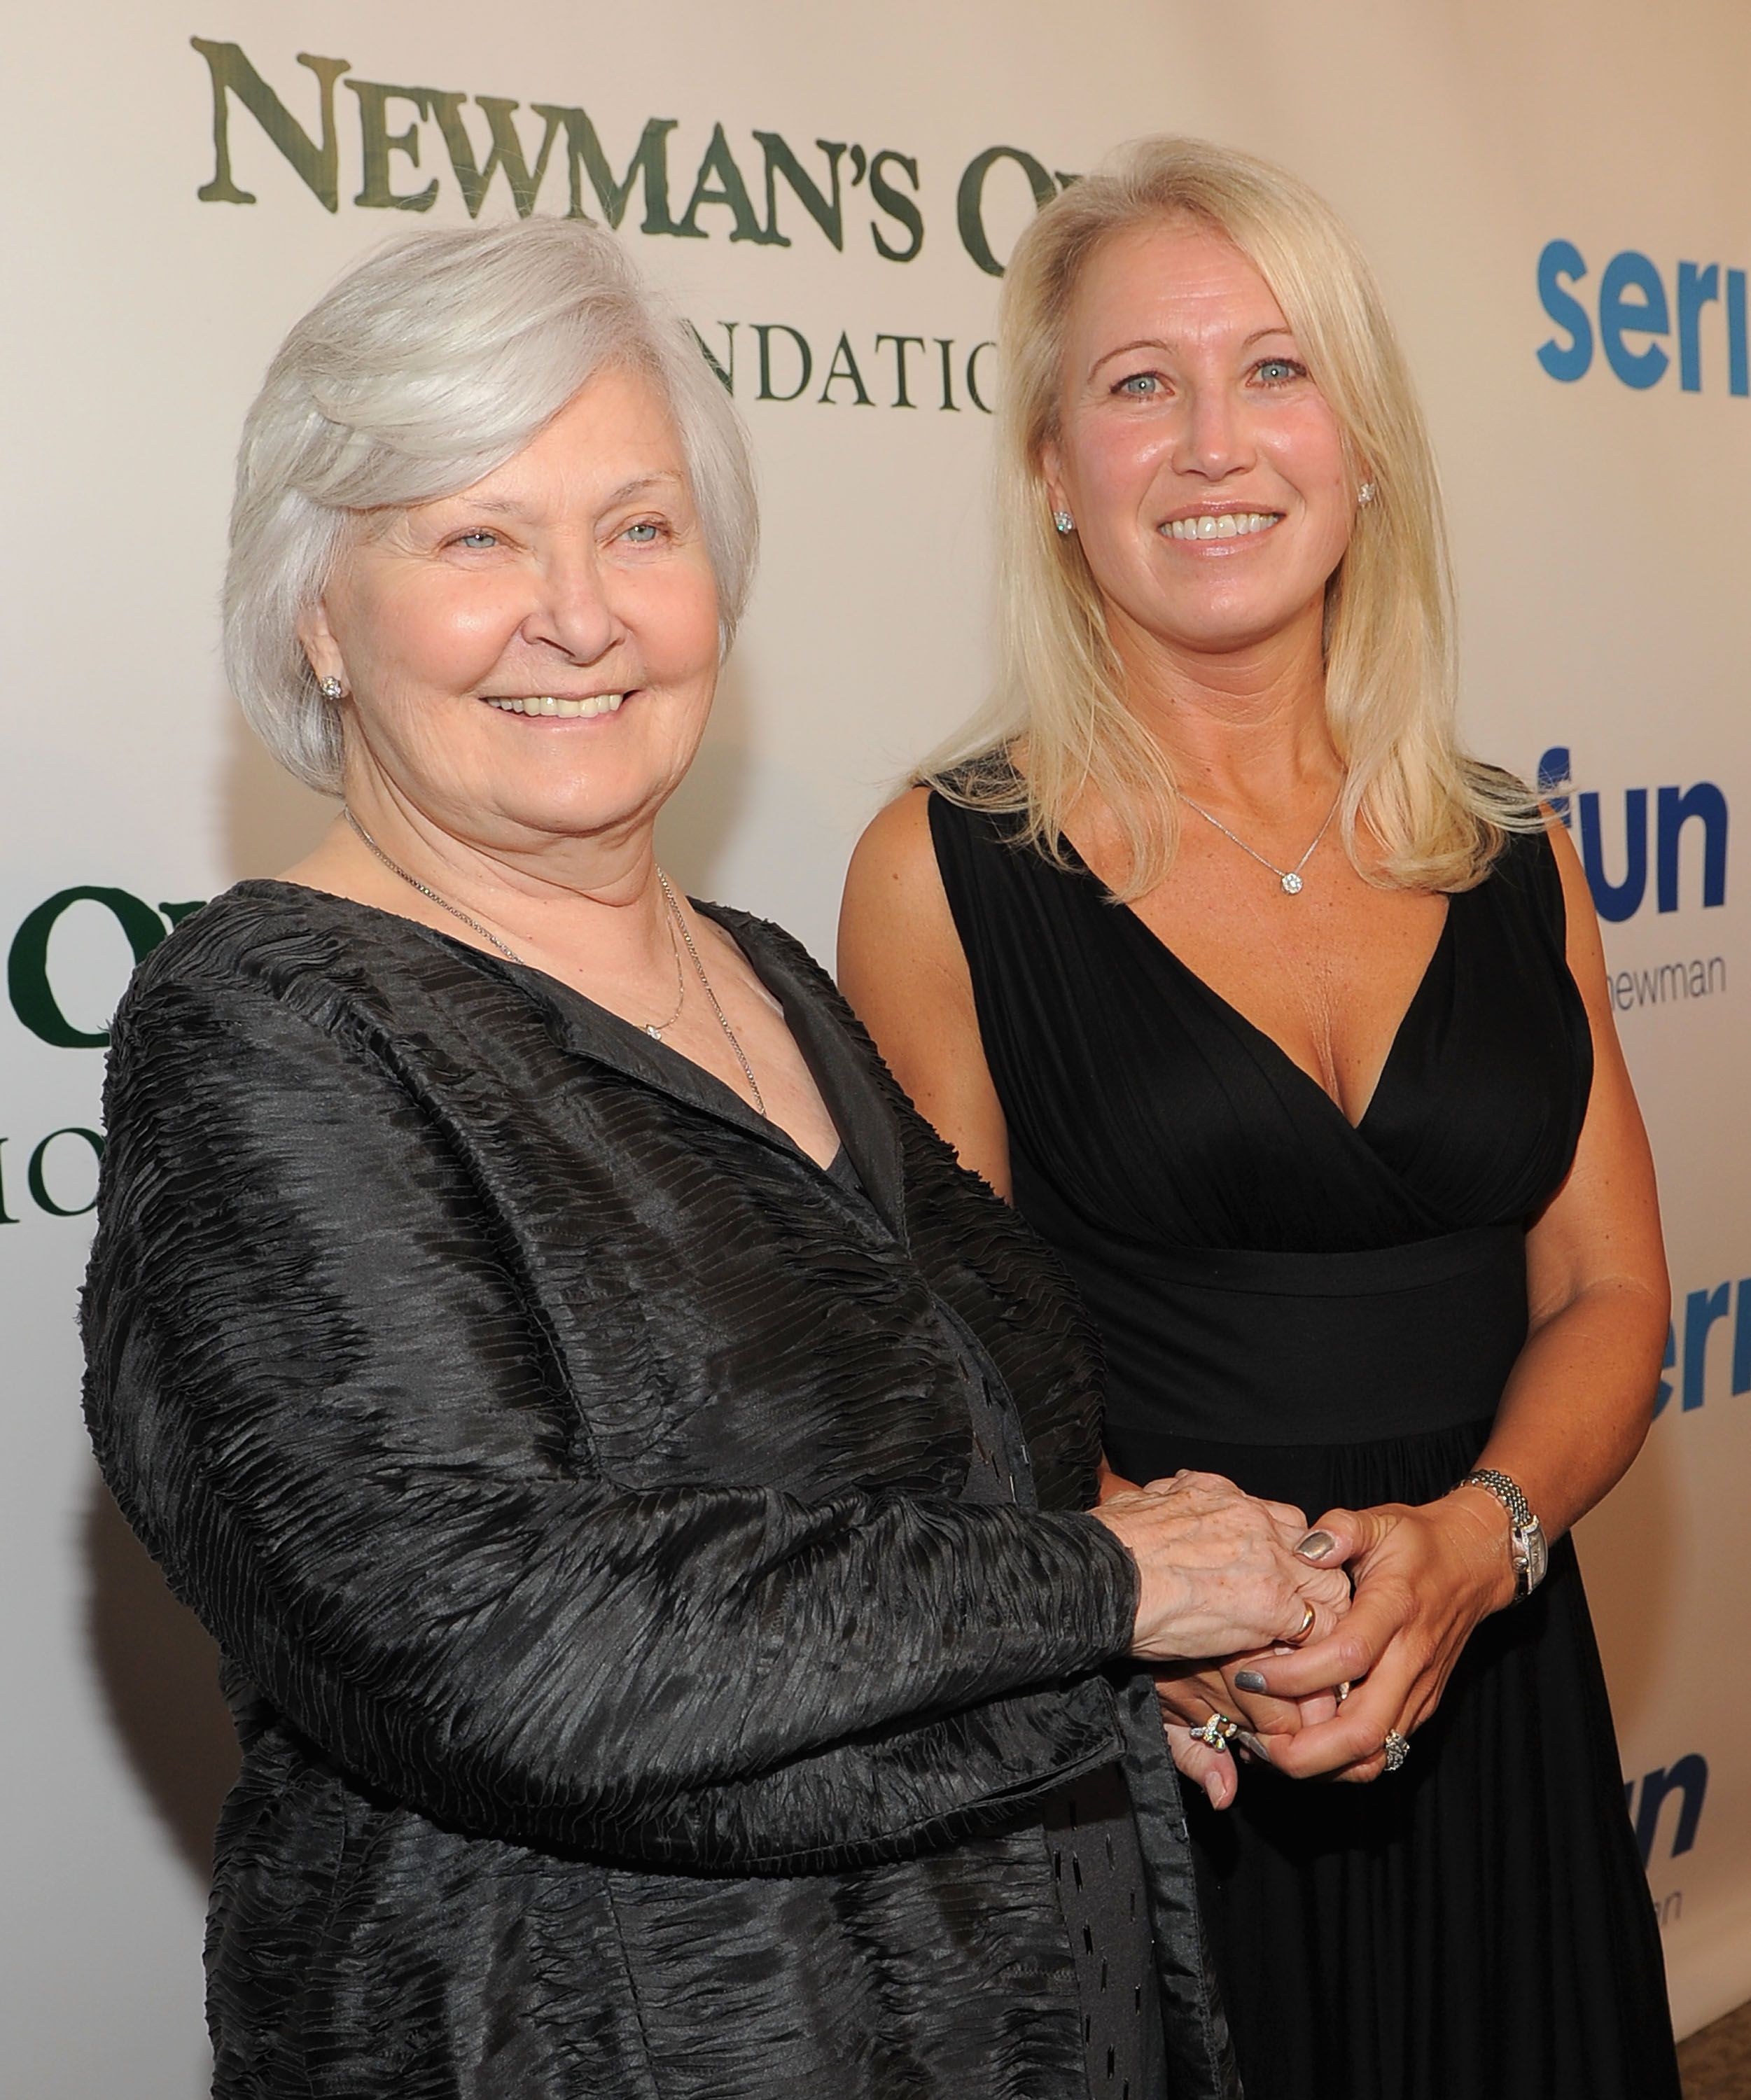 Joanne Woodward and Claire Newman during the celebration of Paul Newman's Dream to Benefit the SeriousFun Children's Network at Avery Fisher Hall, Lincoln Center on April 2, 2012 in New York City. | Source: Getty Images